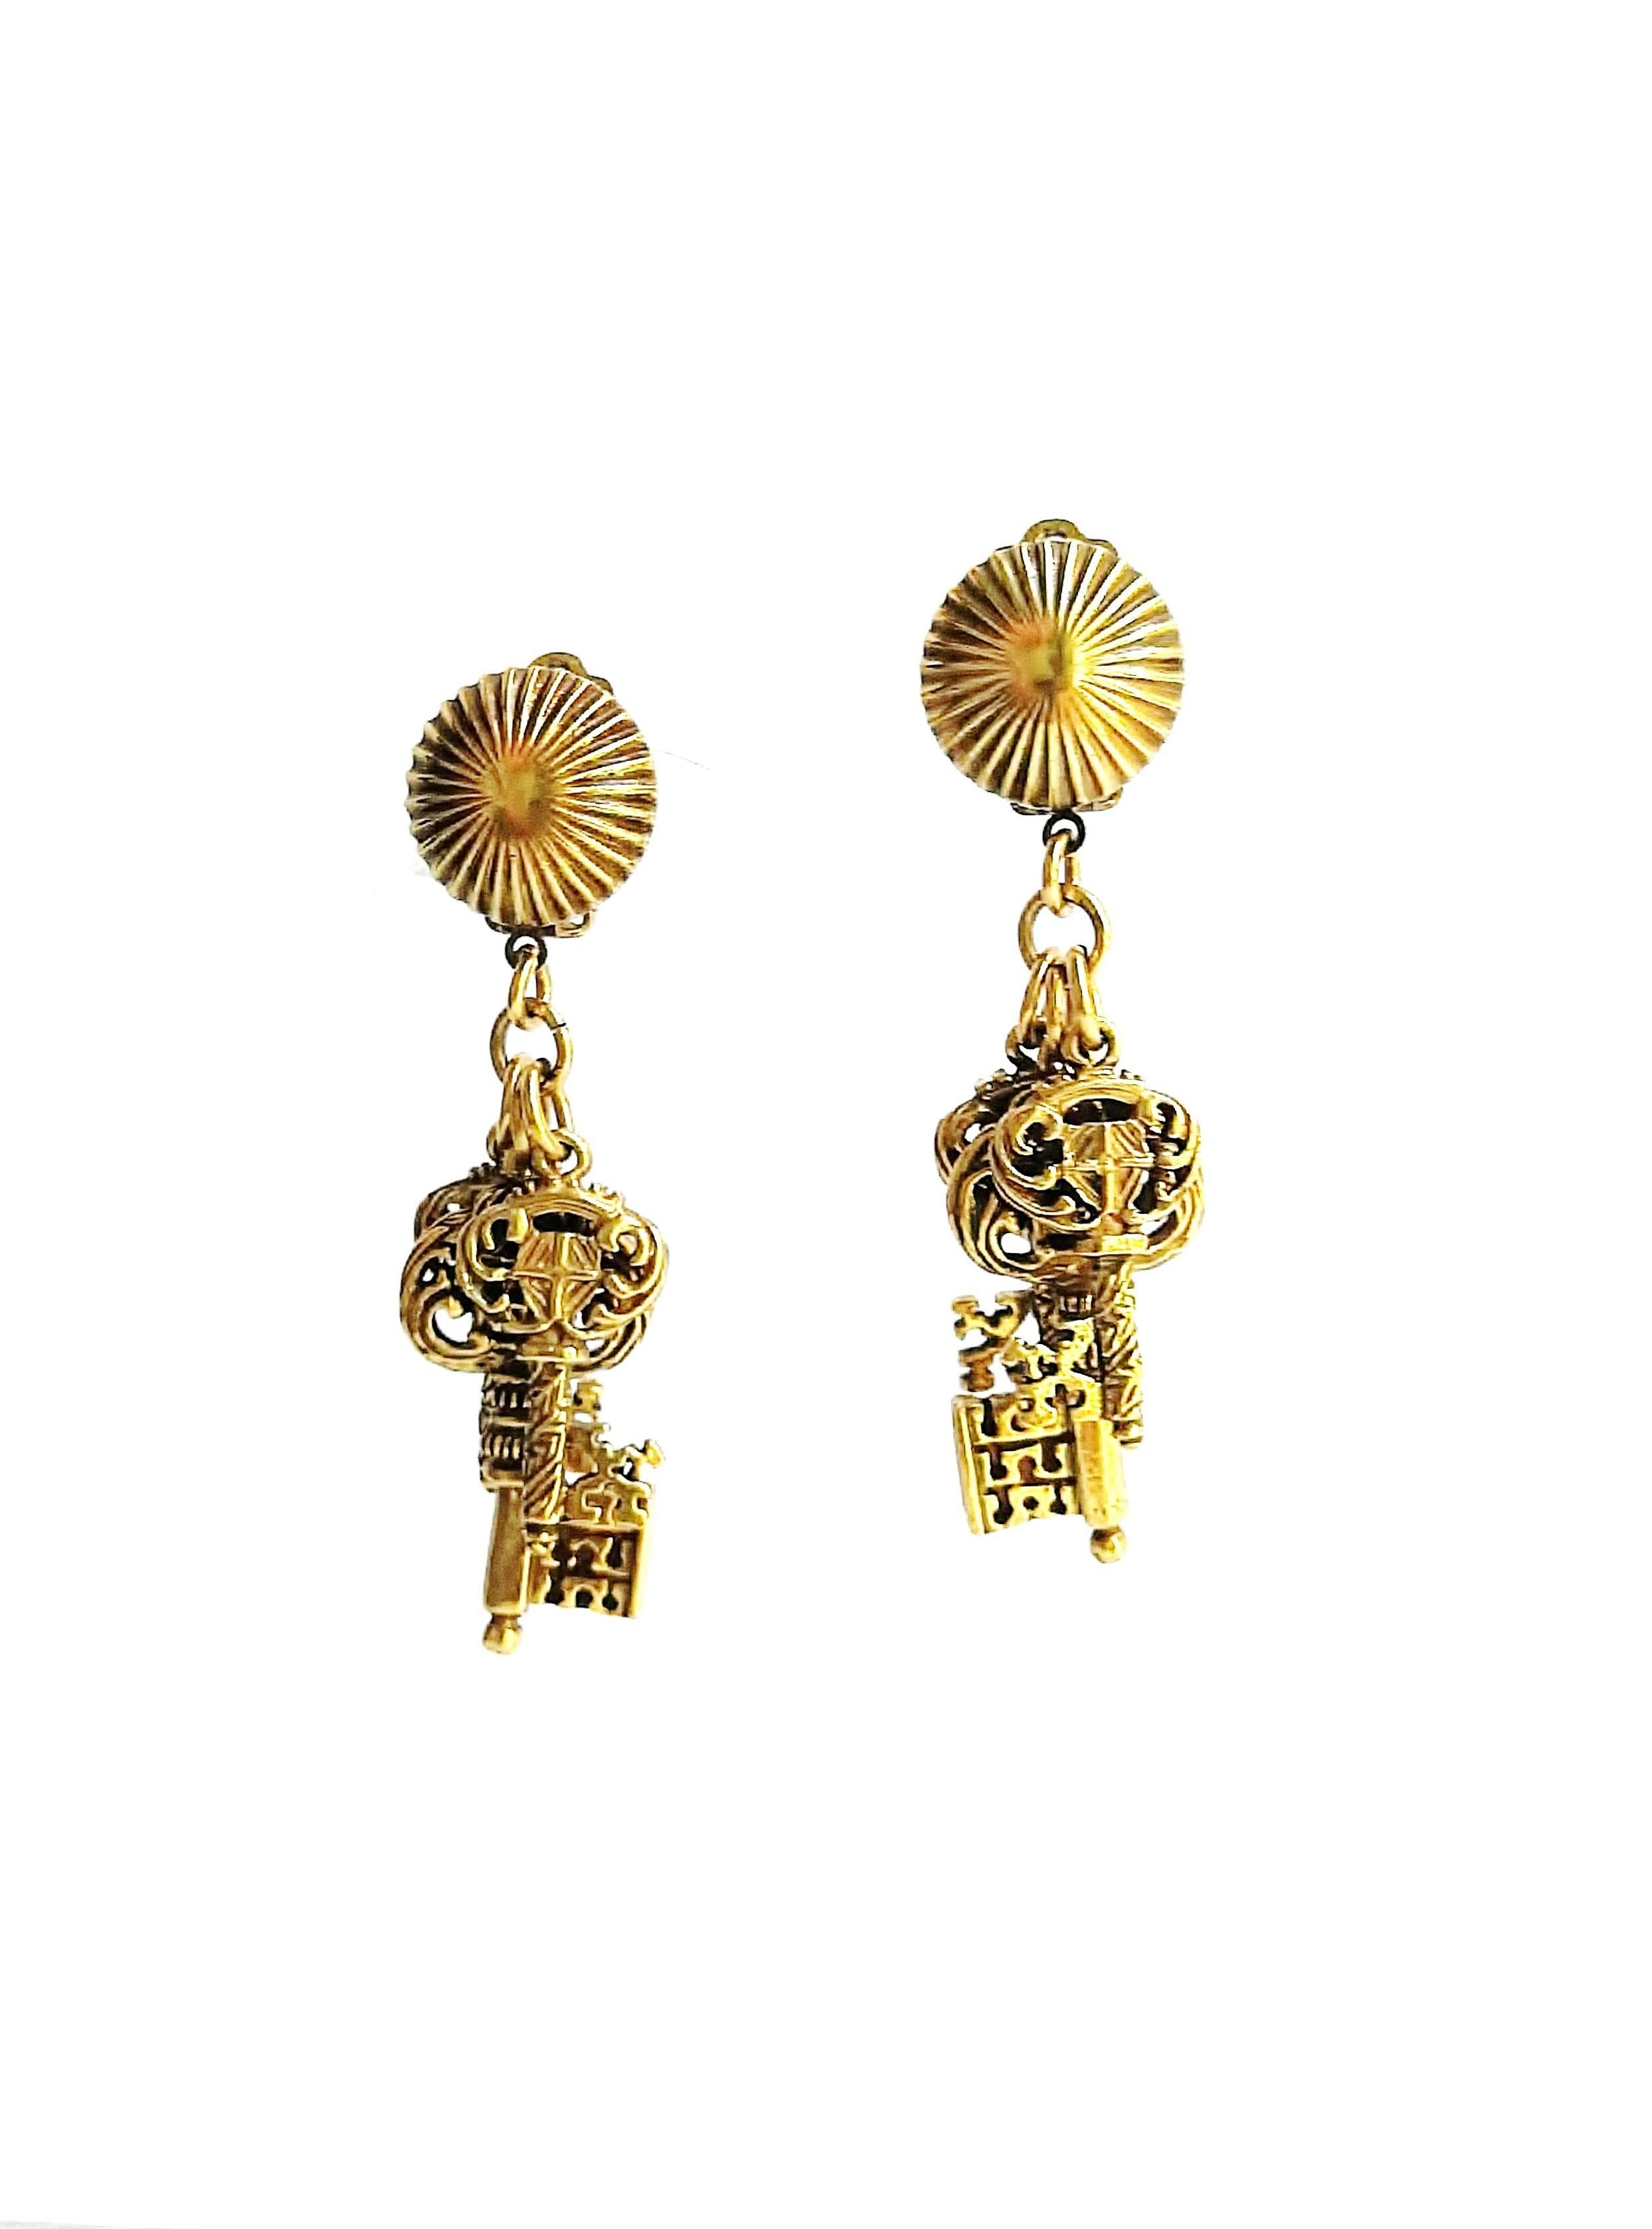 These striking and unusual earrings by Selini, with beautifully cast and detailed keys, are fun and easy to wear, their tone of gold being of a warm and flattering colour.  Eye catching and for all occasions.